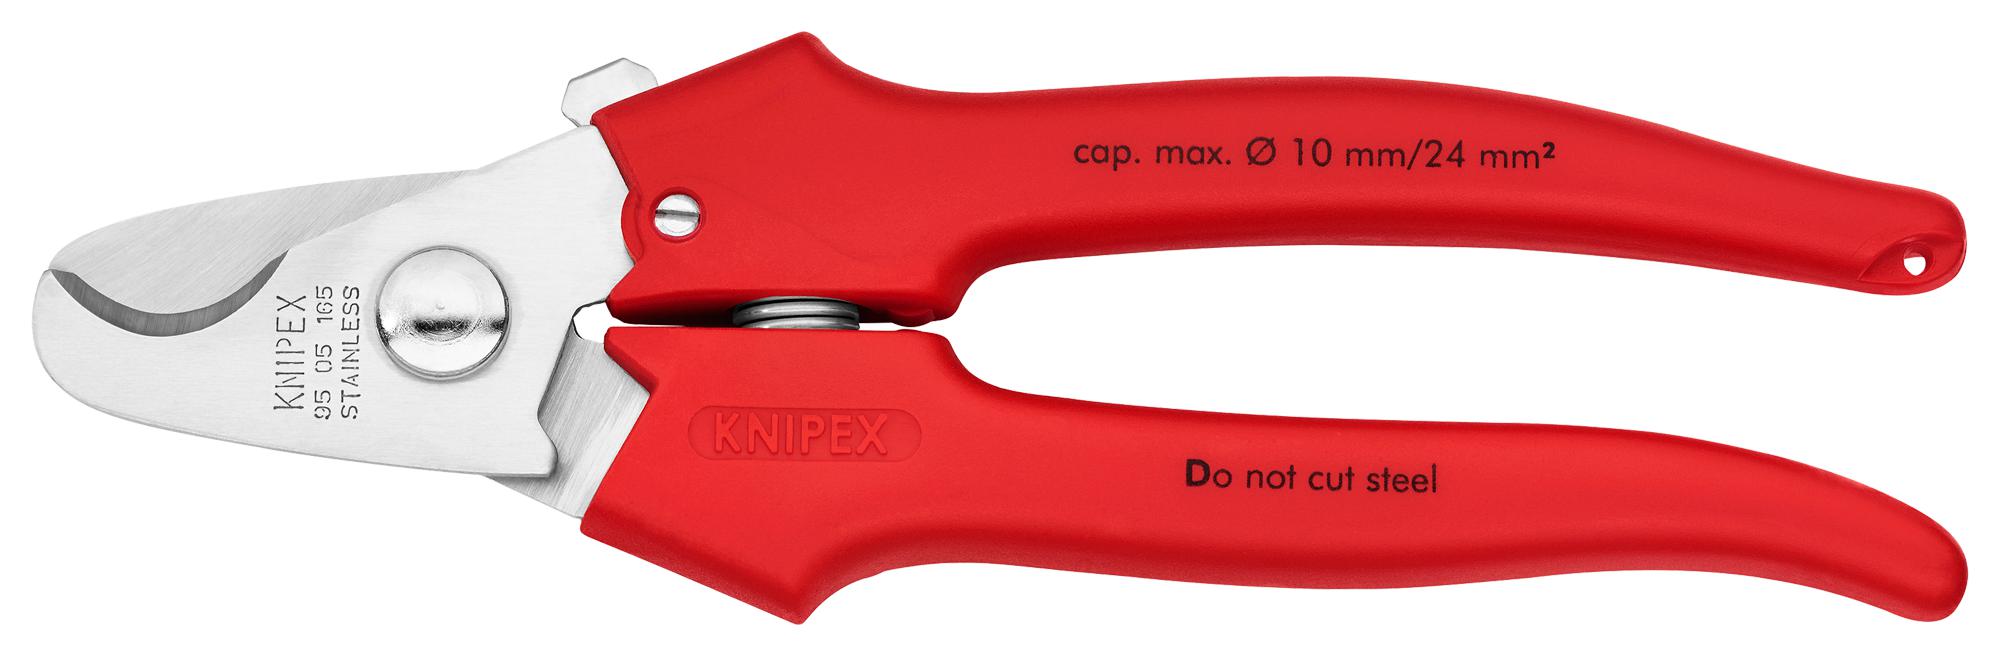 95 05 165 CUTTER, CABLE, 165MM KNIPEX